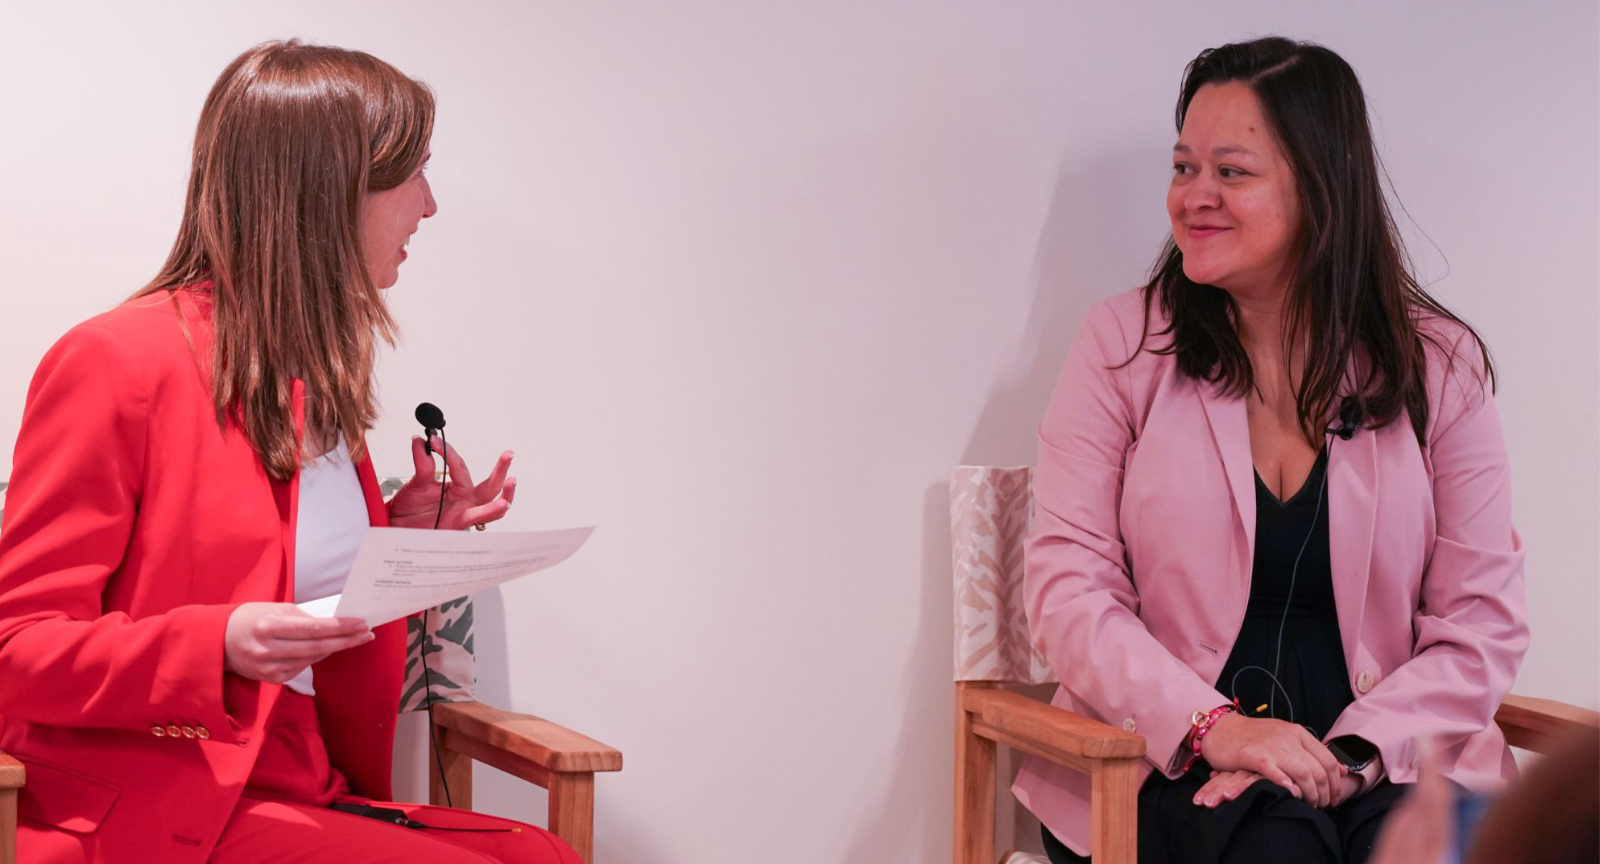 LBJWCS founder and executive director Amy Kroll and Emmy Ruiz discuss normalizing motherhood while working in politics. (Photo courtesy of The Network) 